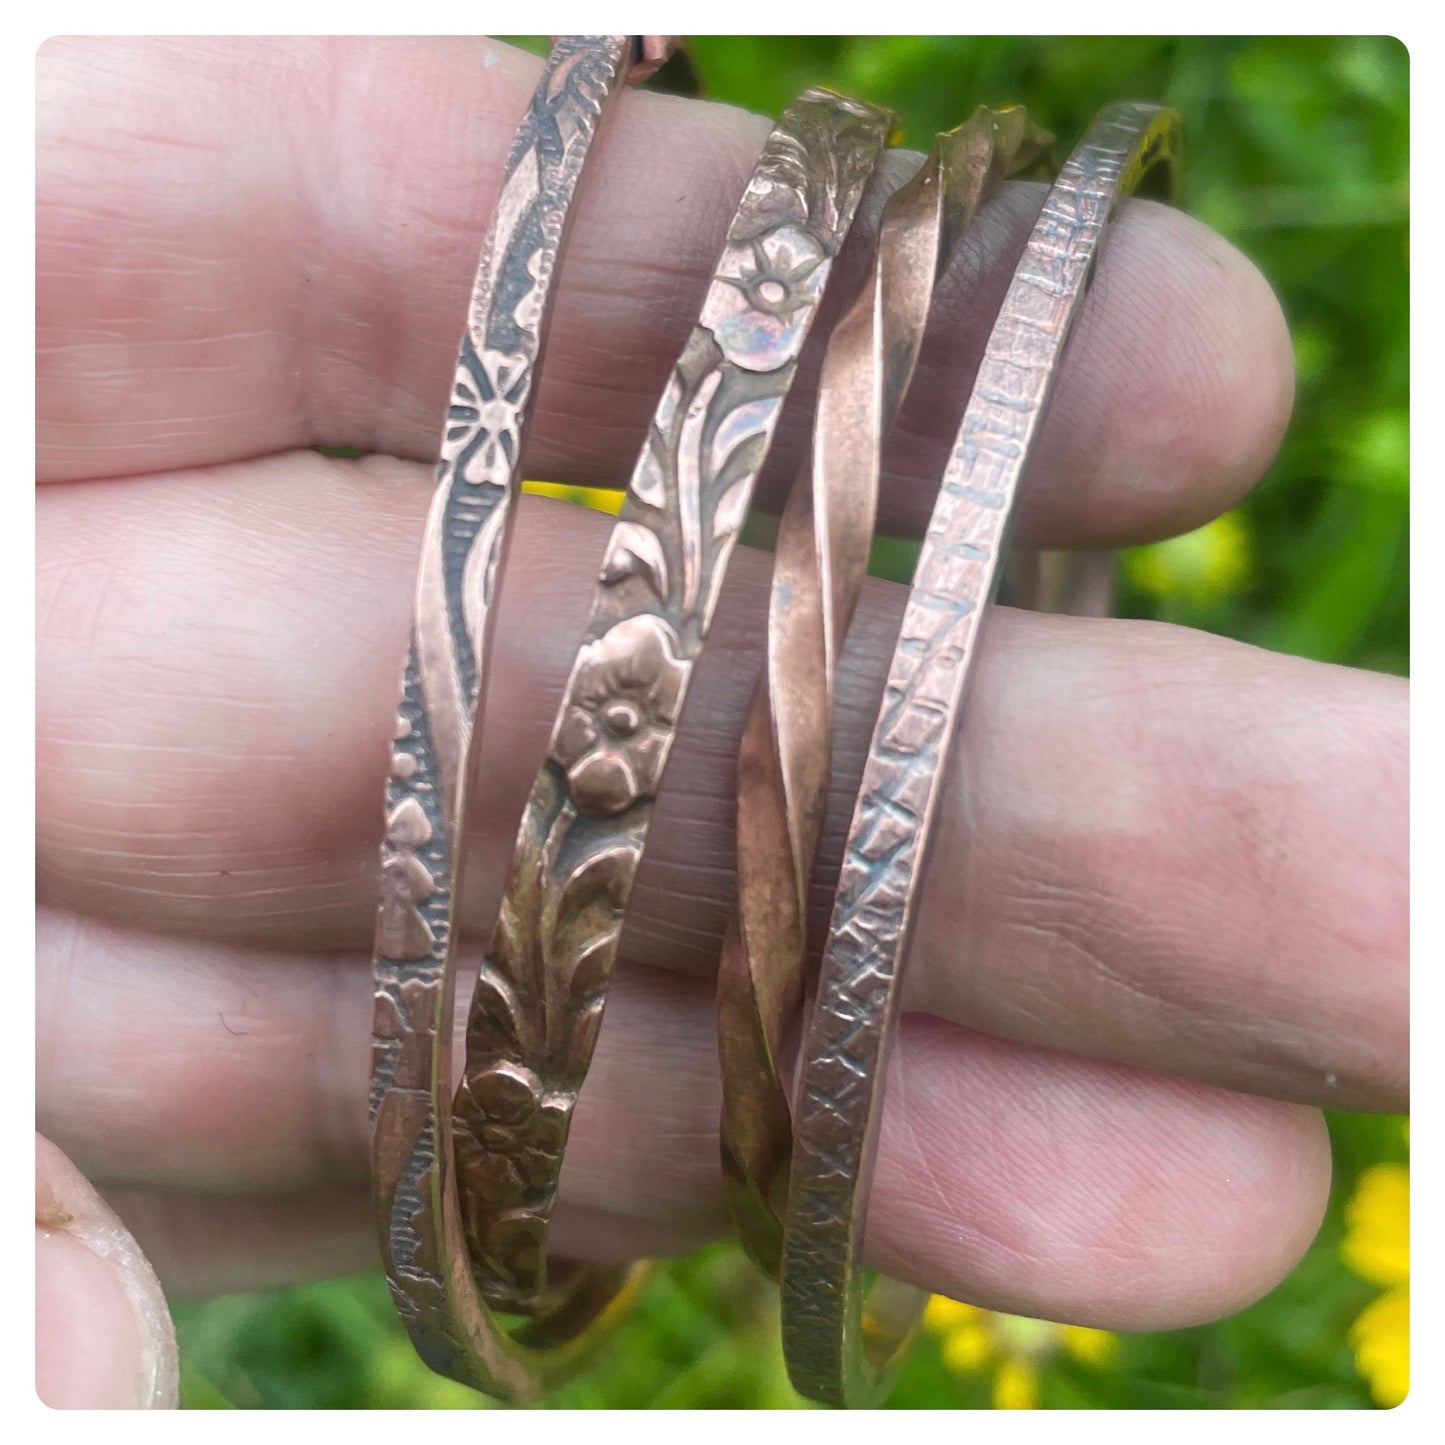 Parent/Teen Copper Bangles Class/ May 18th 2024 12-2